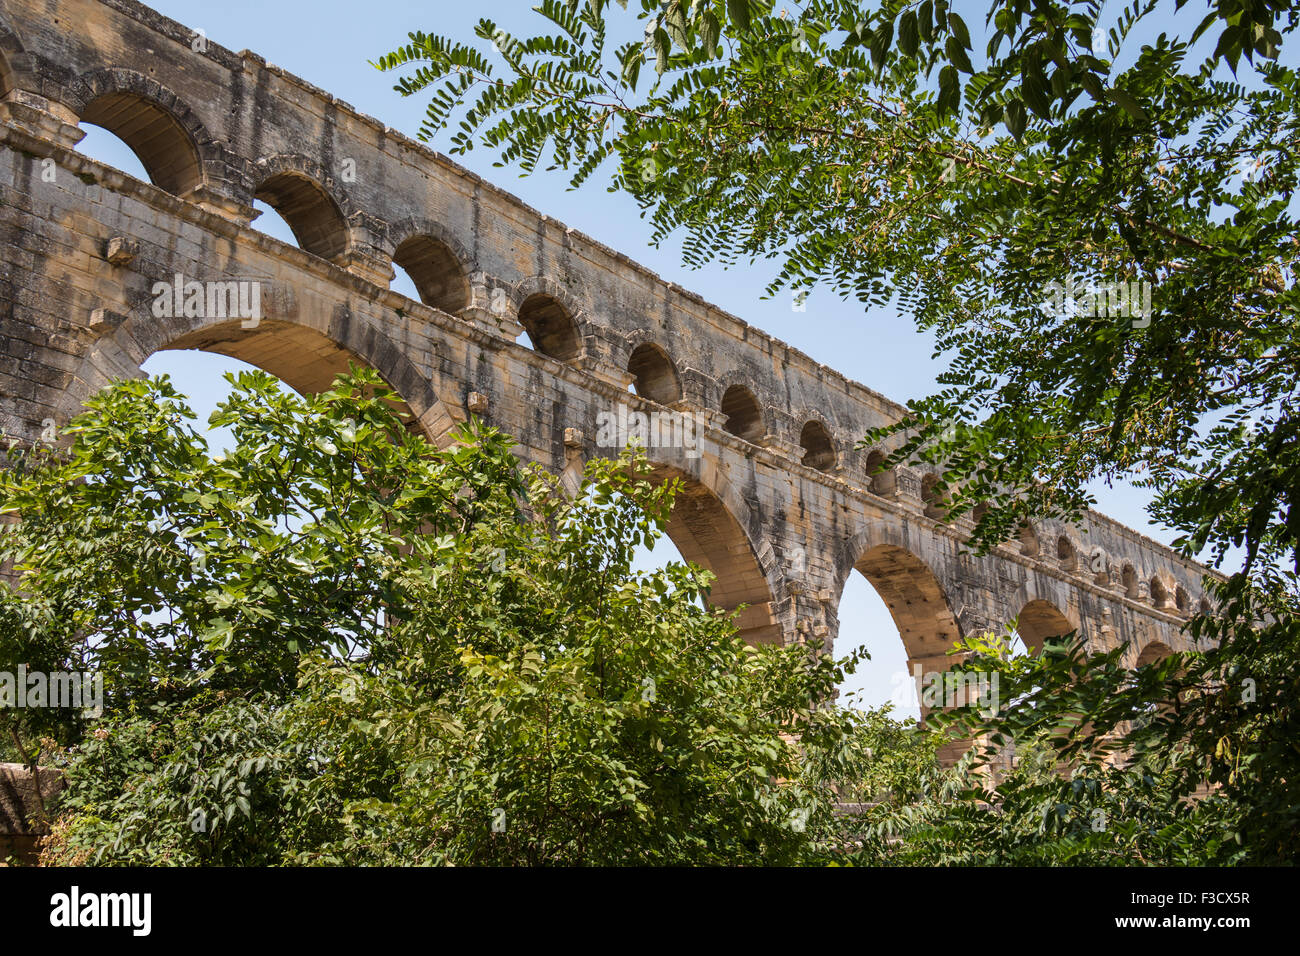 Pont du Gard, ancient Roman aqueduct in France - detail in between trees Stock Photo